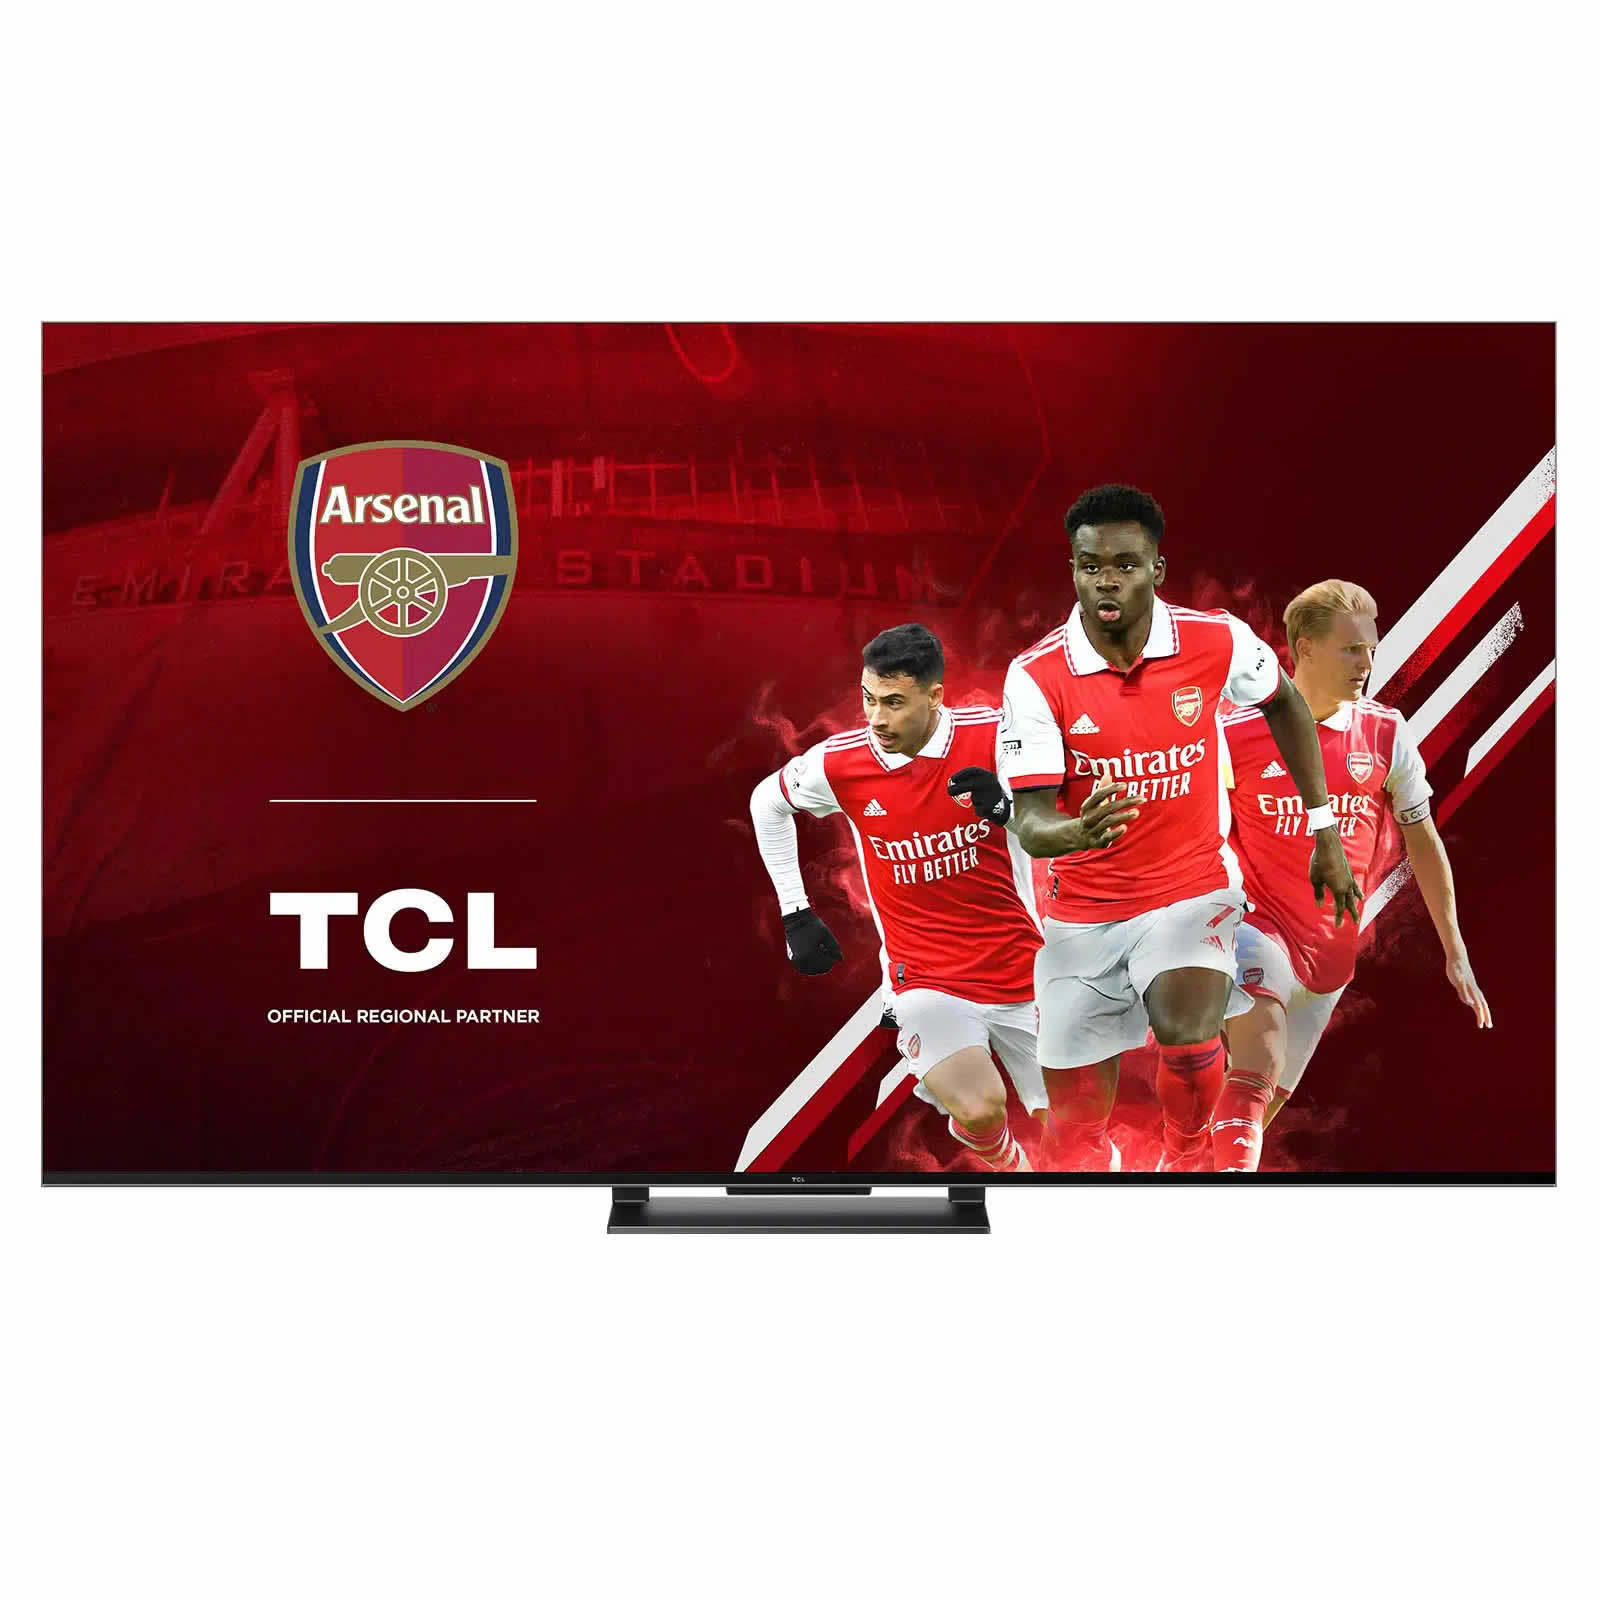 TCL 65inch 4K QLED SMART TV WiFi Freeview HD Google